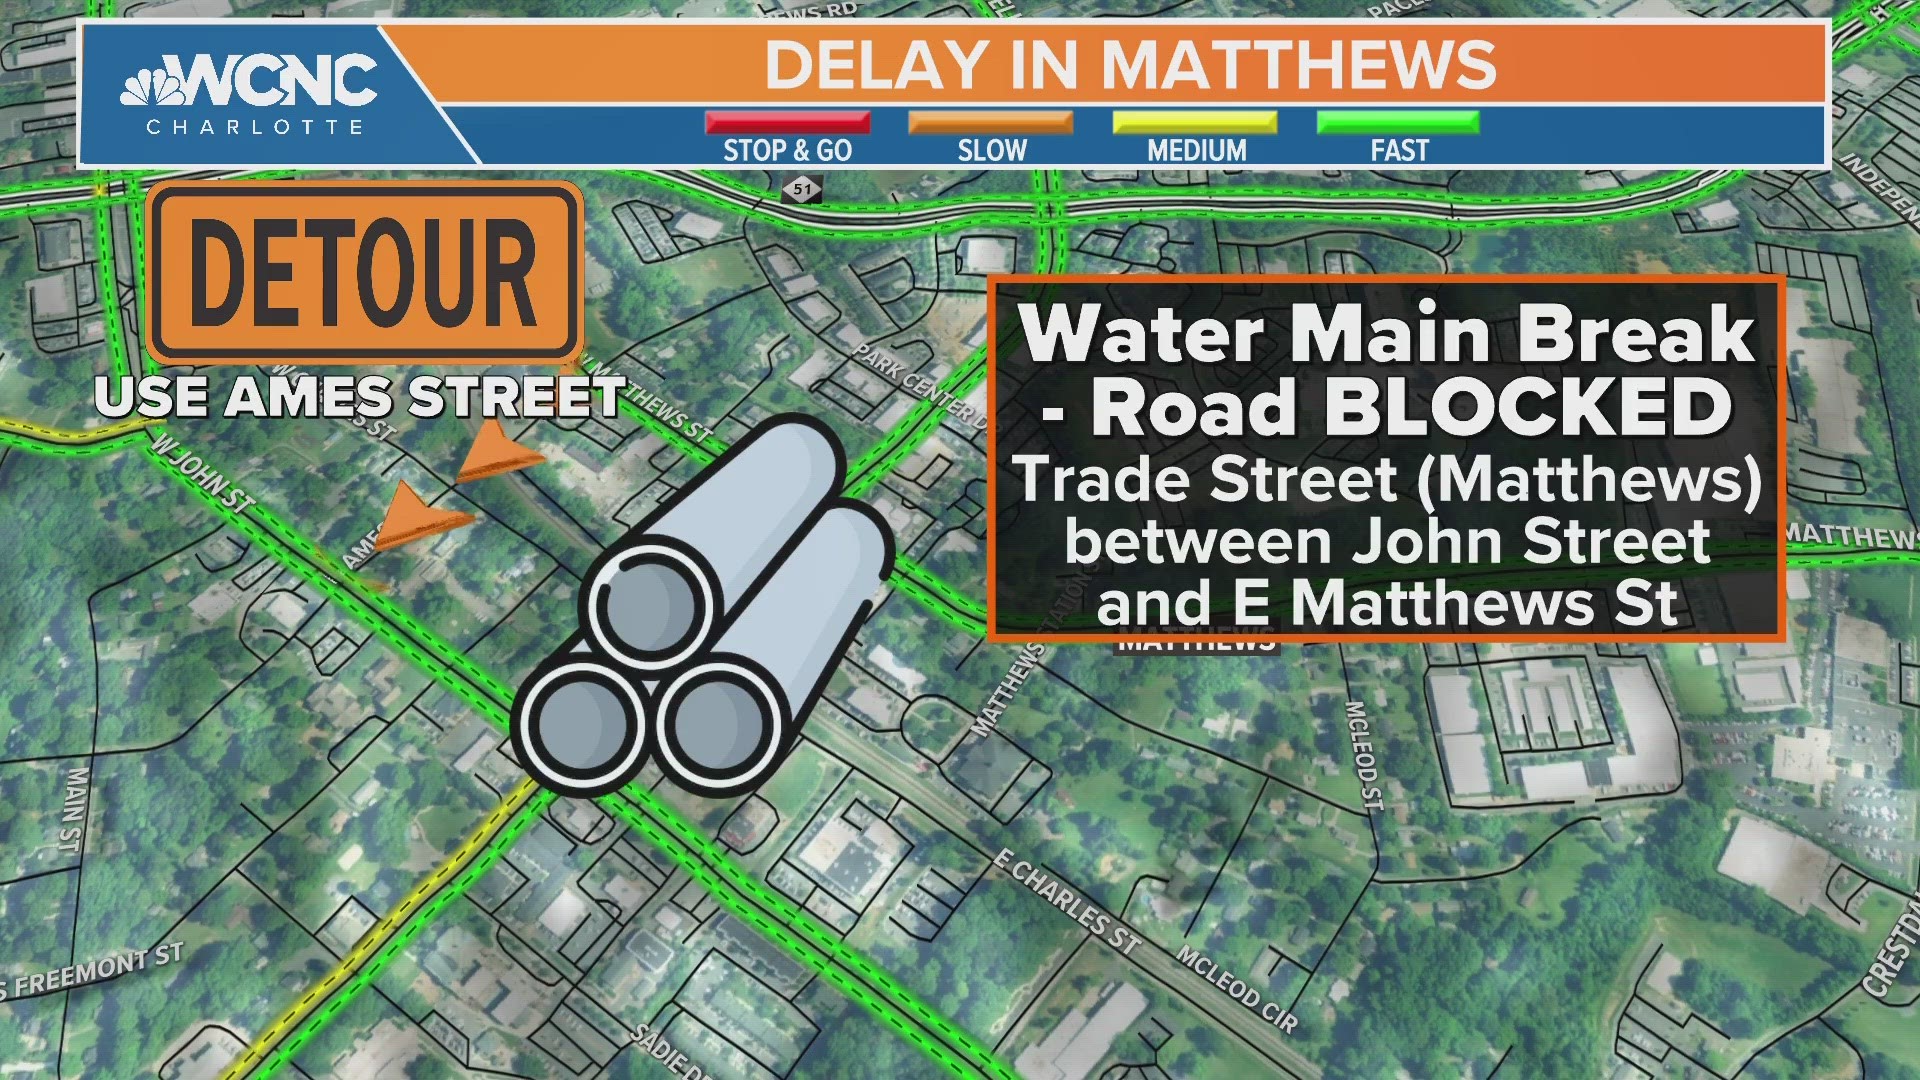 A broken water main closed one of the main roads in downtown Matthews Wednesday.